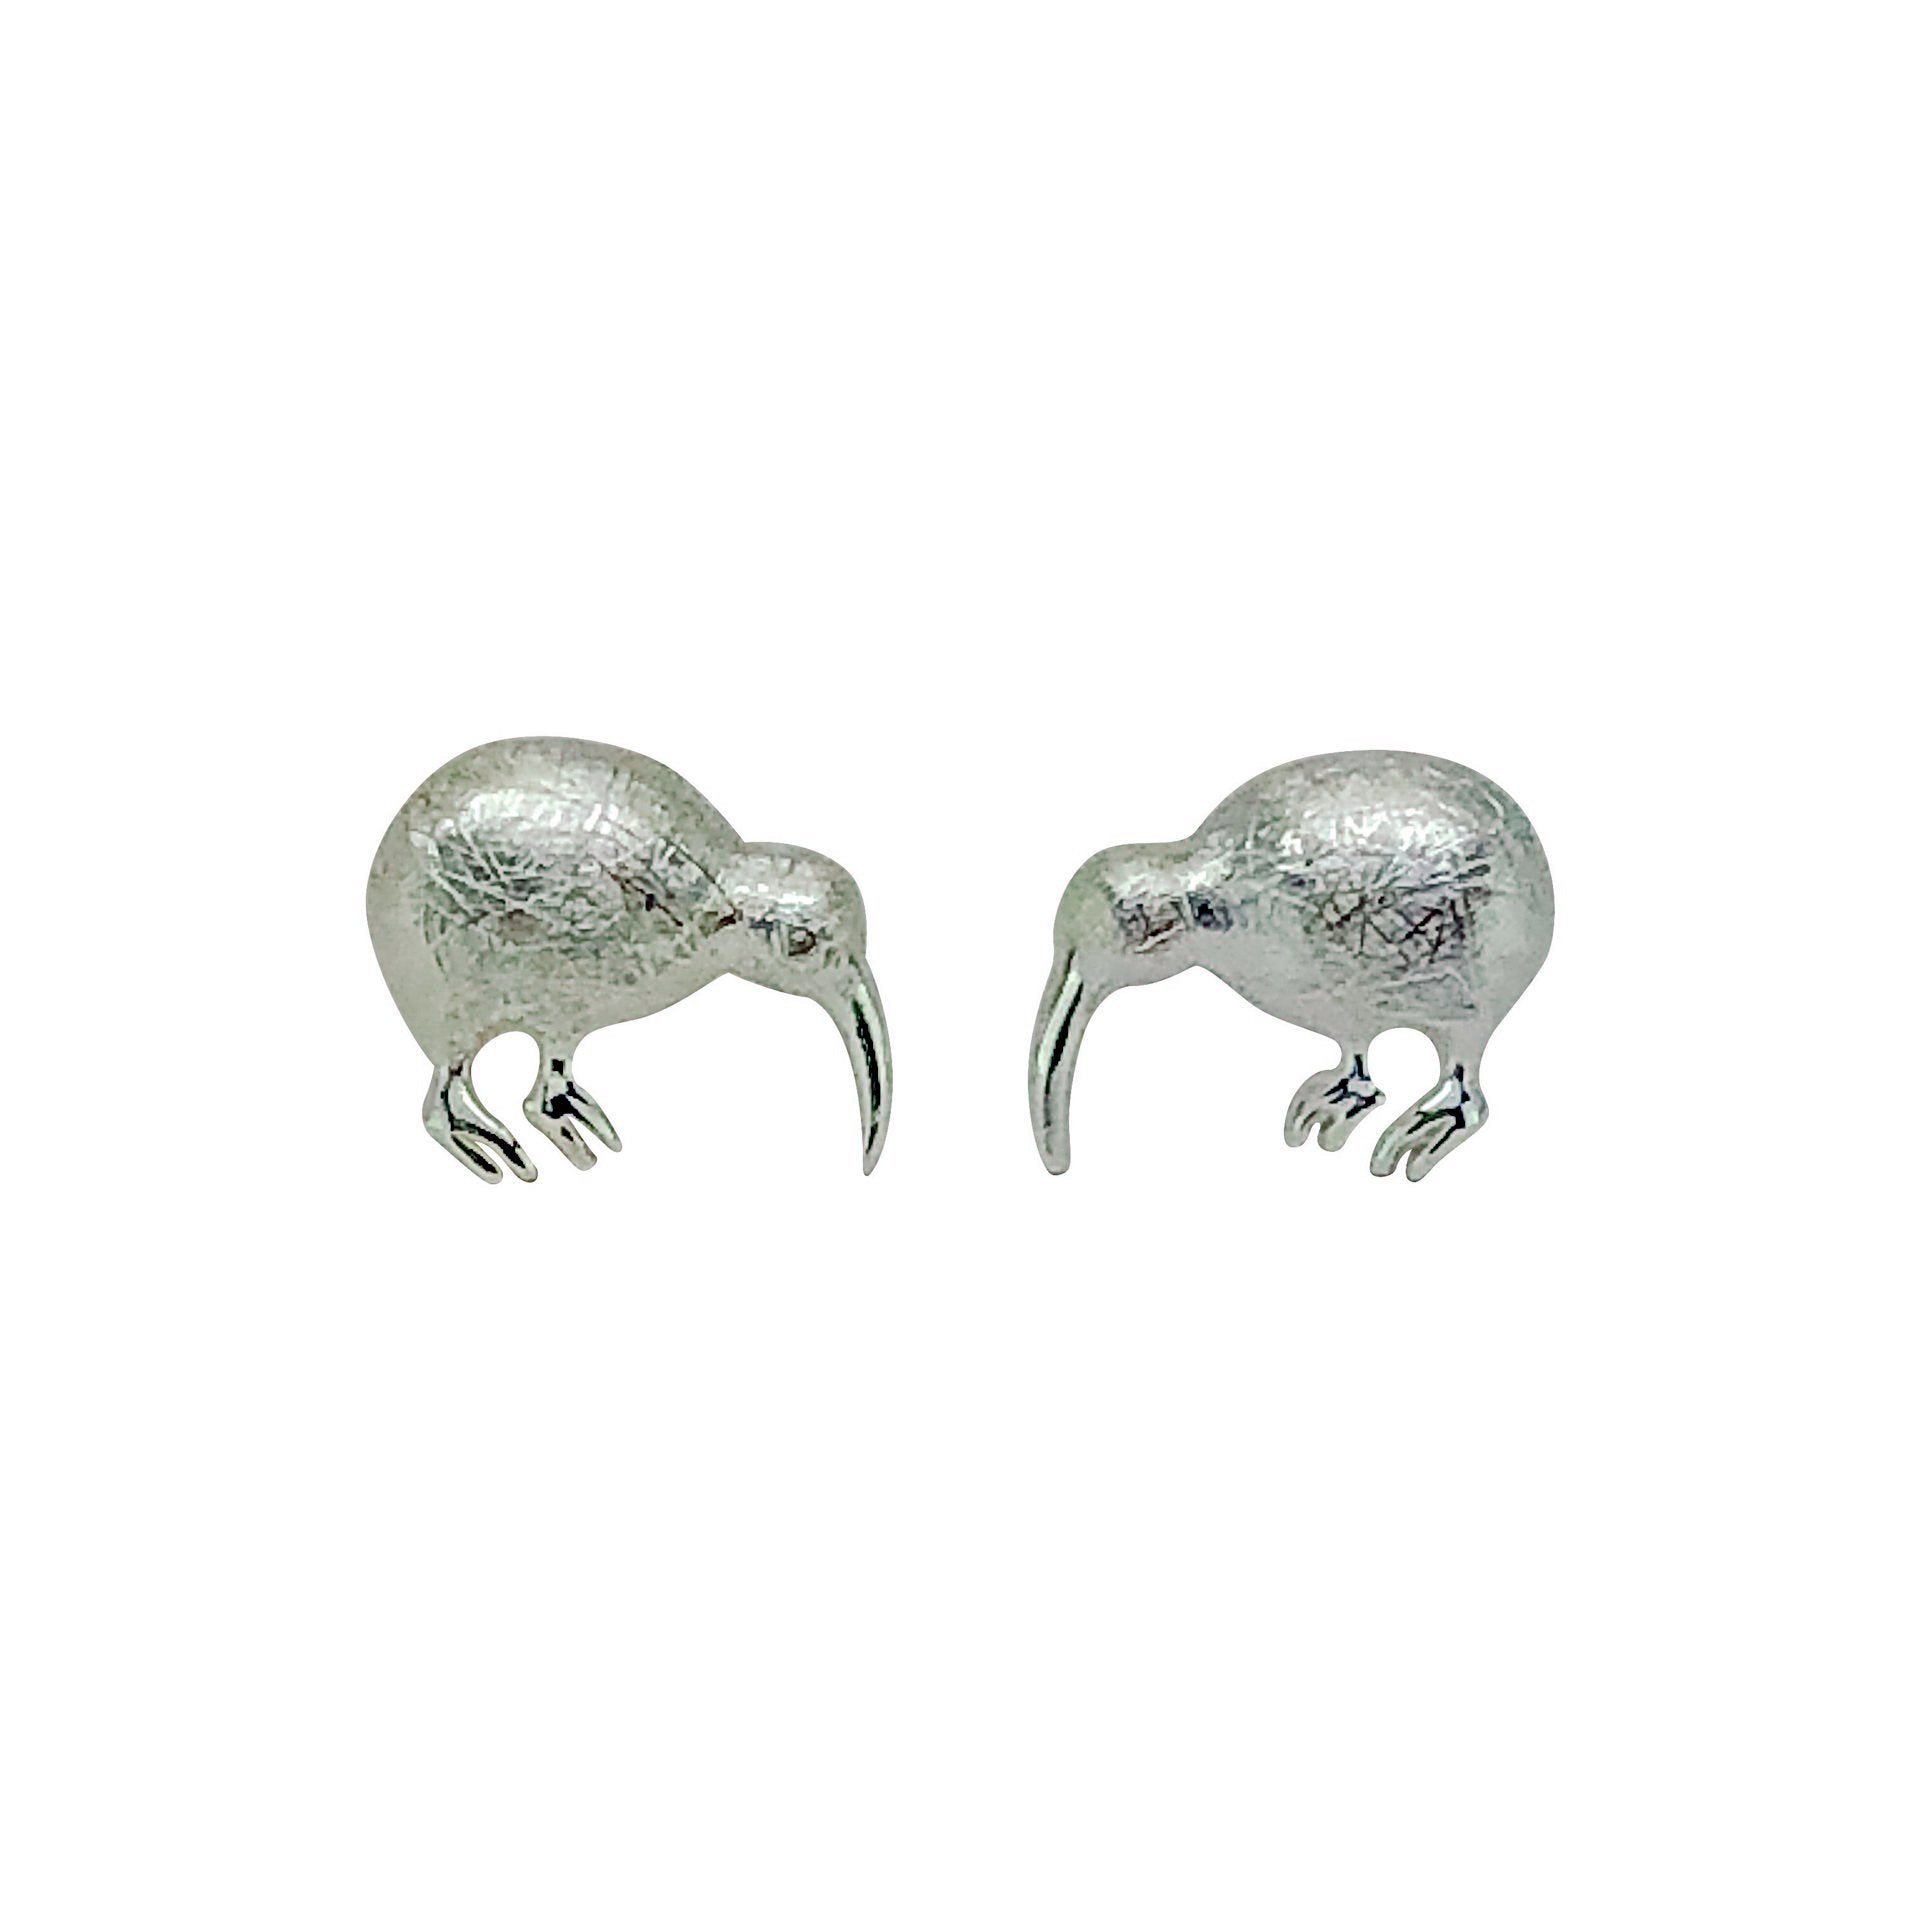 Studs - Rounded Kiwi Iced Silver